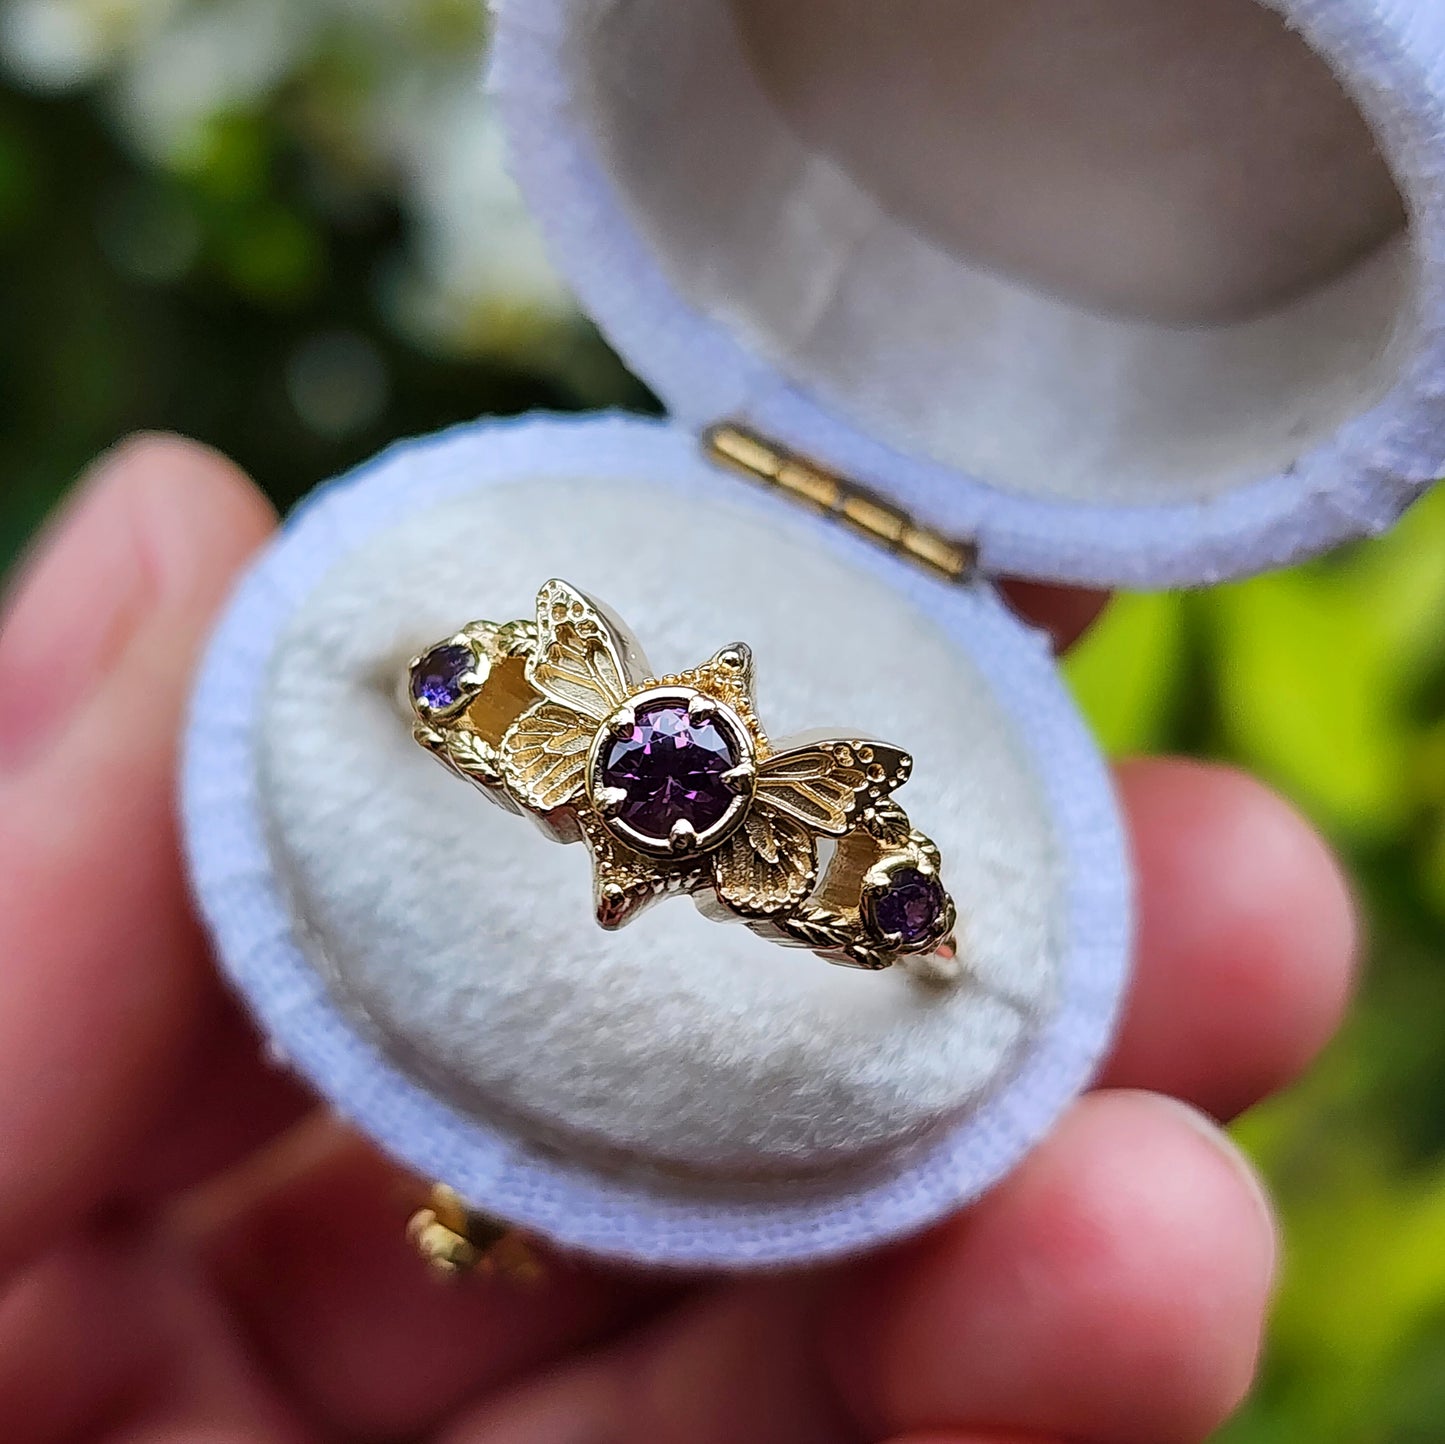 Purple Sapphire Butterfly Faerie 3 Stone Ring with Leaf Split Shank Fantasy Engagement Ring 14k Yellow Gold - Ready to Ship Size 6-8  One of a Kind